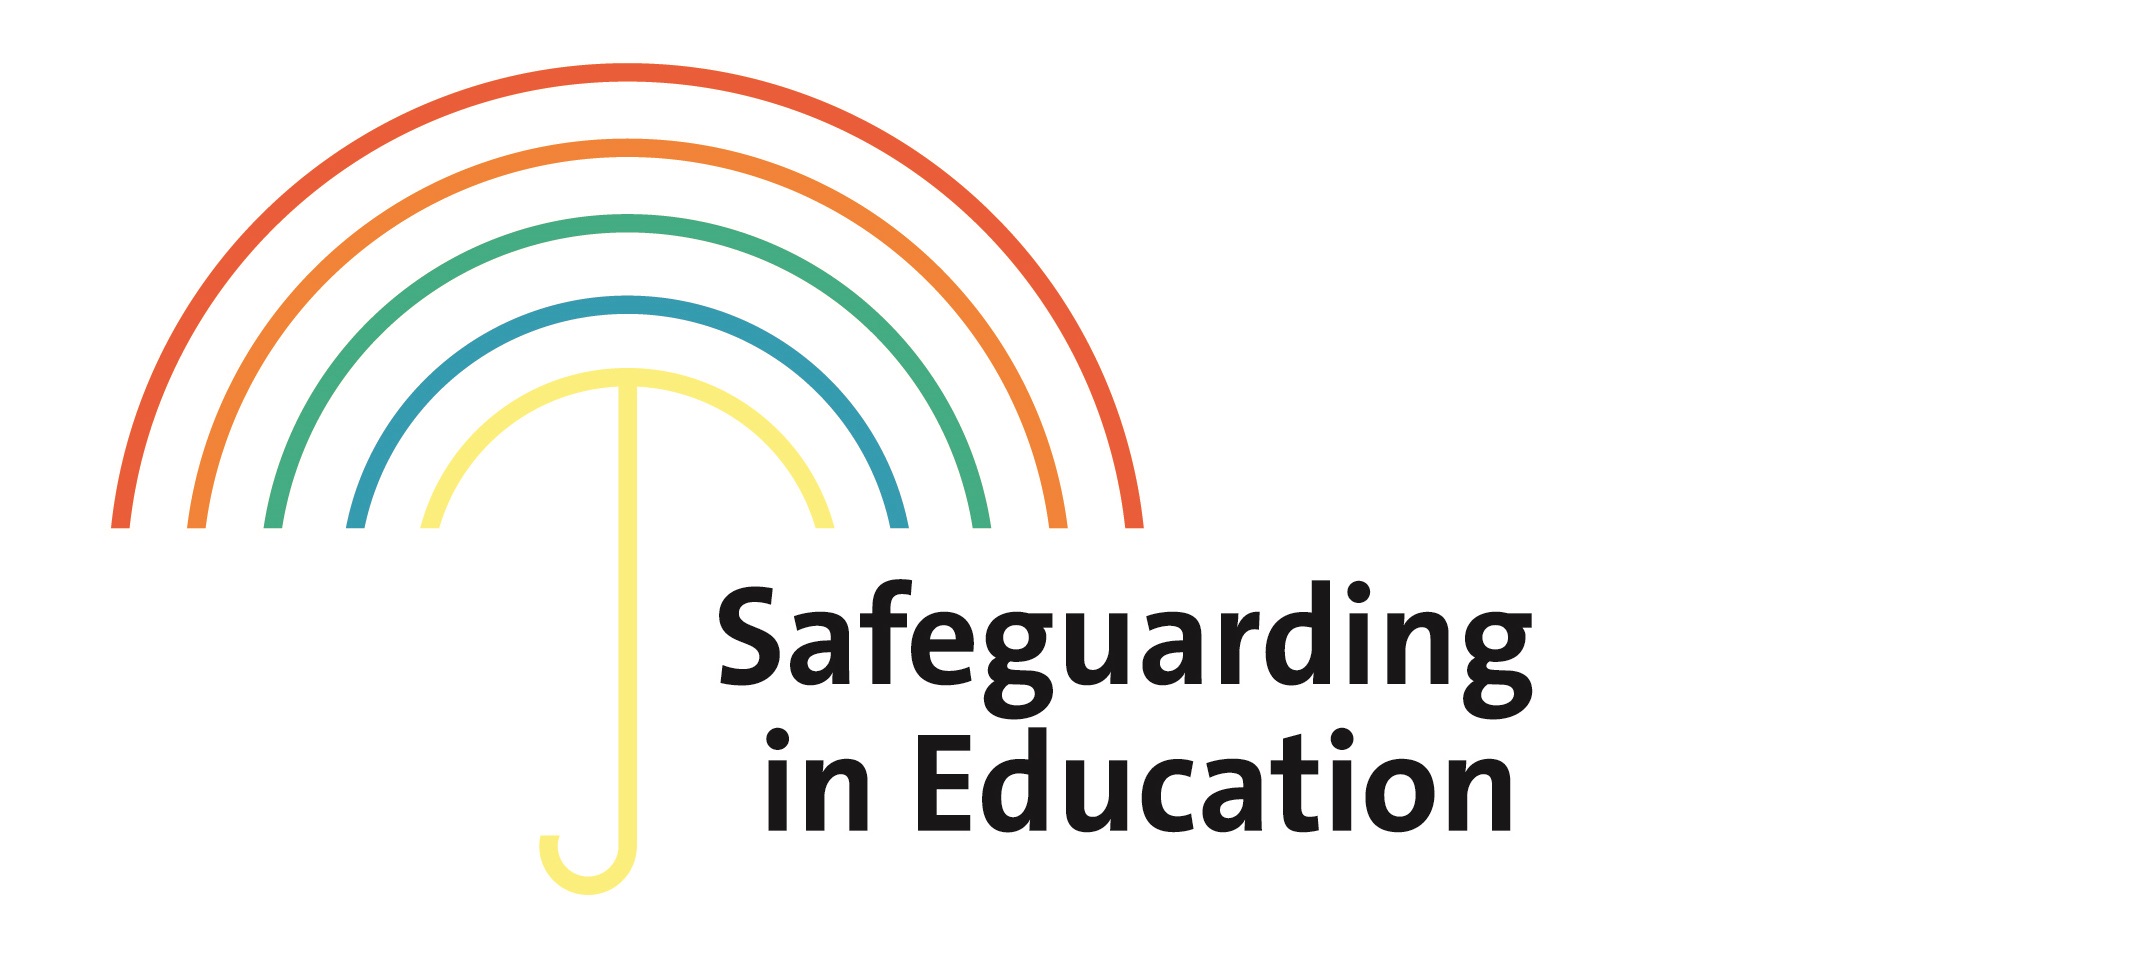 Safeguarding in Education - Bristol Learning City